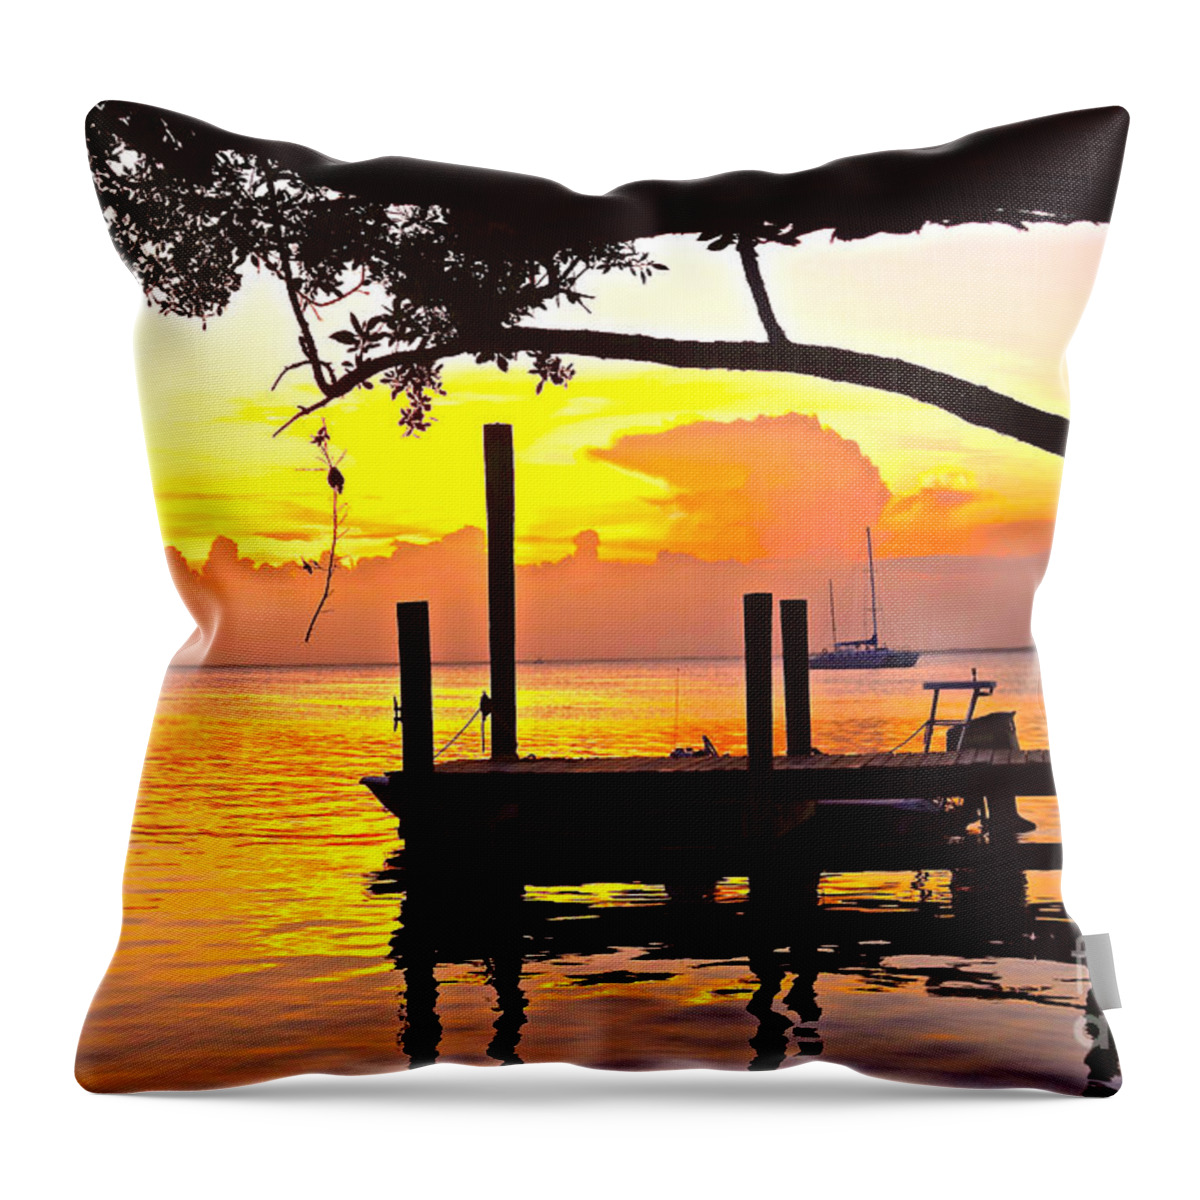 Boat Throw Pillow featuring the photograph Tranquil Sunset 2 by Judy Kay